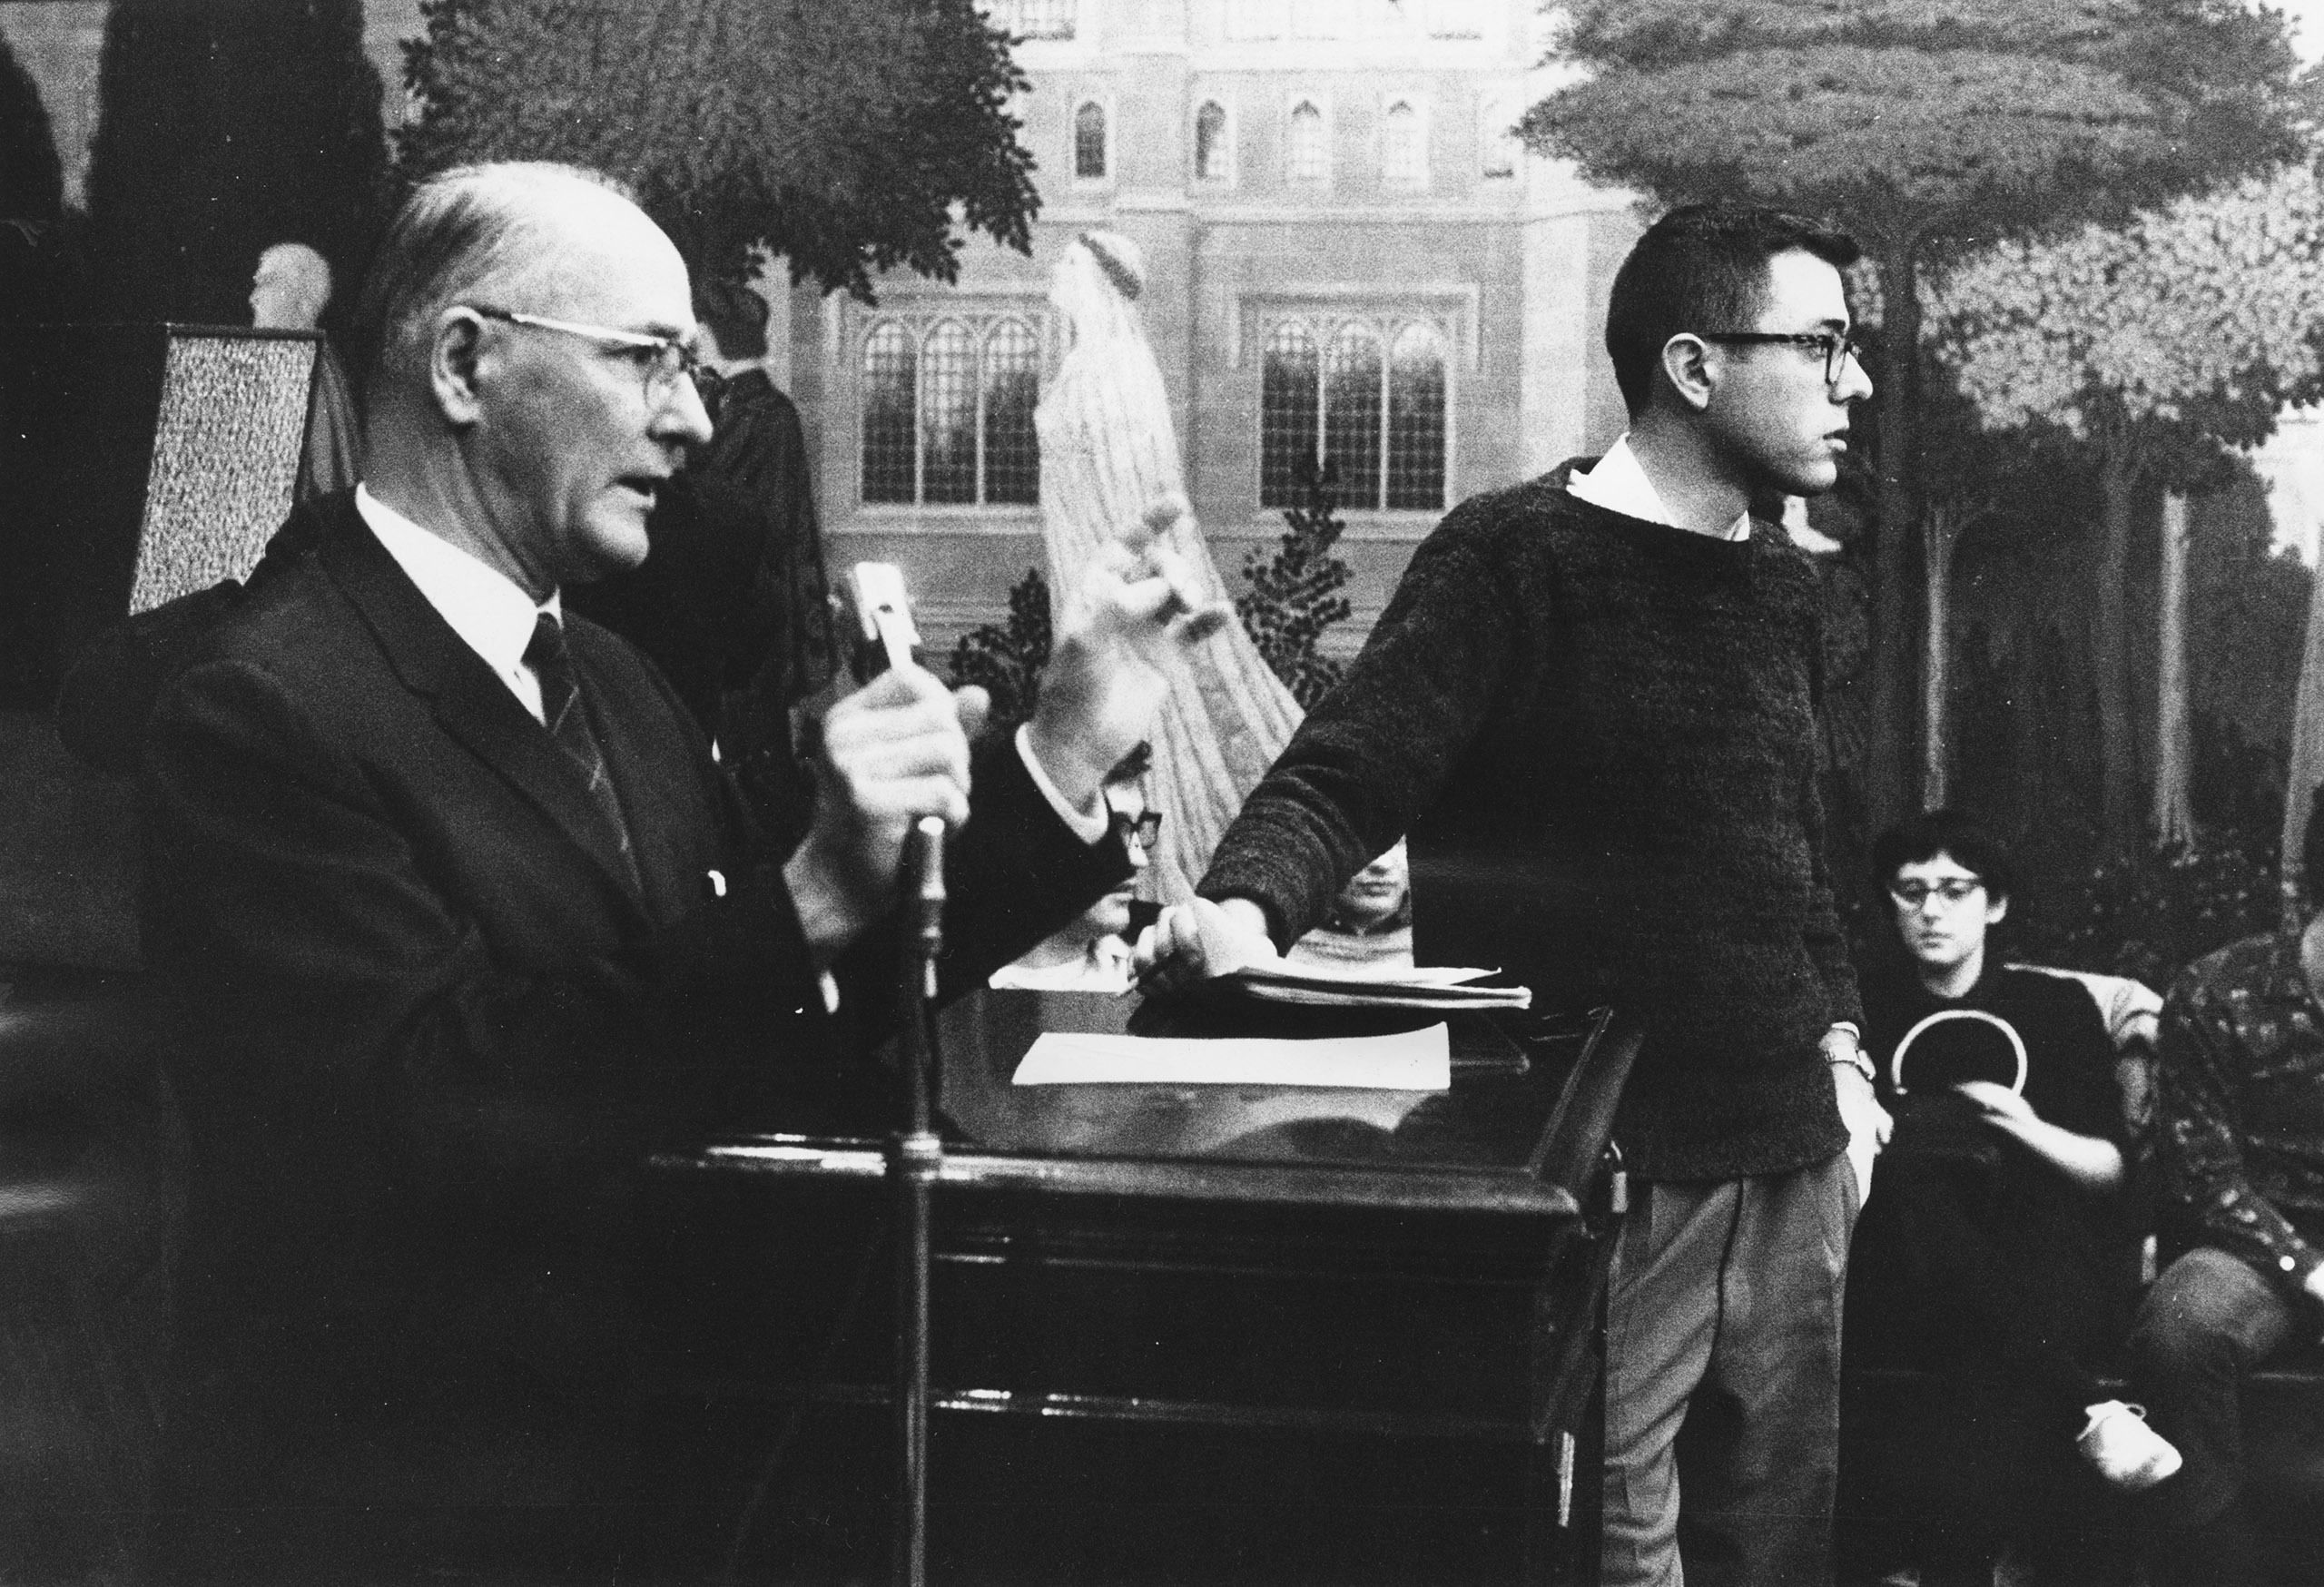 Bernie Sanders (R), member of the steering committee, stands next to George Beadle, University of Chicago president, who is speaking at a Committee On Racial Equality meeting on housing sit-ins. 1962. (Special Collections Research Center/University of Chicago Library)